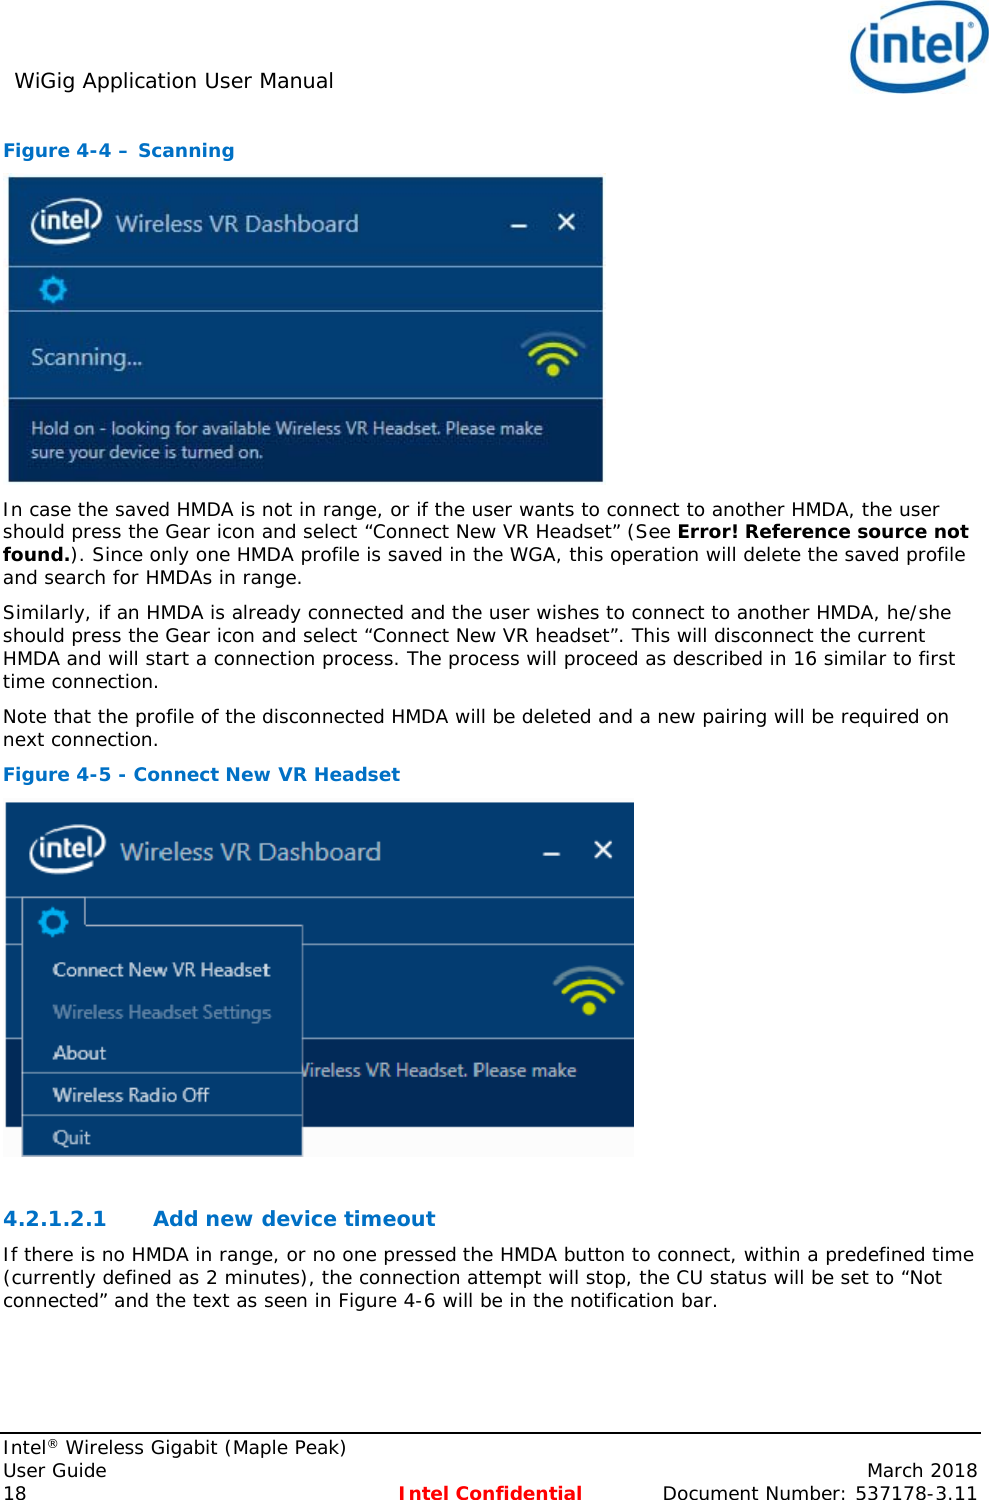 WiGig Application User Manual     Intel® Wireless Gigabit (Maple Peak) User Guide    March 2018 18 Intel Confidential  Document Number: 537178-3.11 Figure 4-4 – Scanning  In case the saved HMDA is not in range, or if the user wants to connect to another HMDA, the user should press the Gear icon and select “Connect New VR Headset” (See Error! Reference source not found.). Since only one HMDA profile is saved in the WGA, this operation will delete the saved profile and search for HMDAs in range.  Similarly, if an HMDA is already connected and the user wishes to connect to another HMDA, he/she should press the Gear icon and select “Connect New VR headset”. This will disconnect the current HMDA and will start a connection process. The process will proceed as described in 16 similar to first time connection.  Note that the profile of the disconnected HMDA will be deleted and a new pairing will be required on next connection. Figure 4-5 - Connect New VR Headset   4.2.1.2.1 Add new device timeout  If there is no HMDA in range, or no one pressed the HMDA button to connect, within a predefined time (currently defined as 2 minutes), the connection attempt will stop, the CU status will be set to “Not connected” and the text as seen in Figure 4-6 will be in the notification bar. 